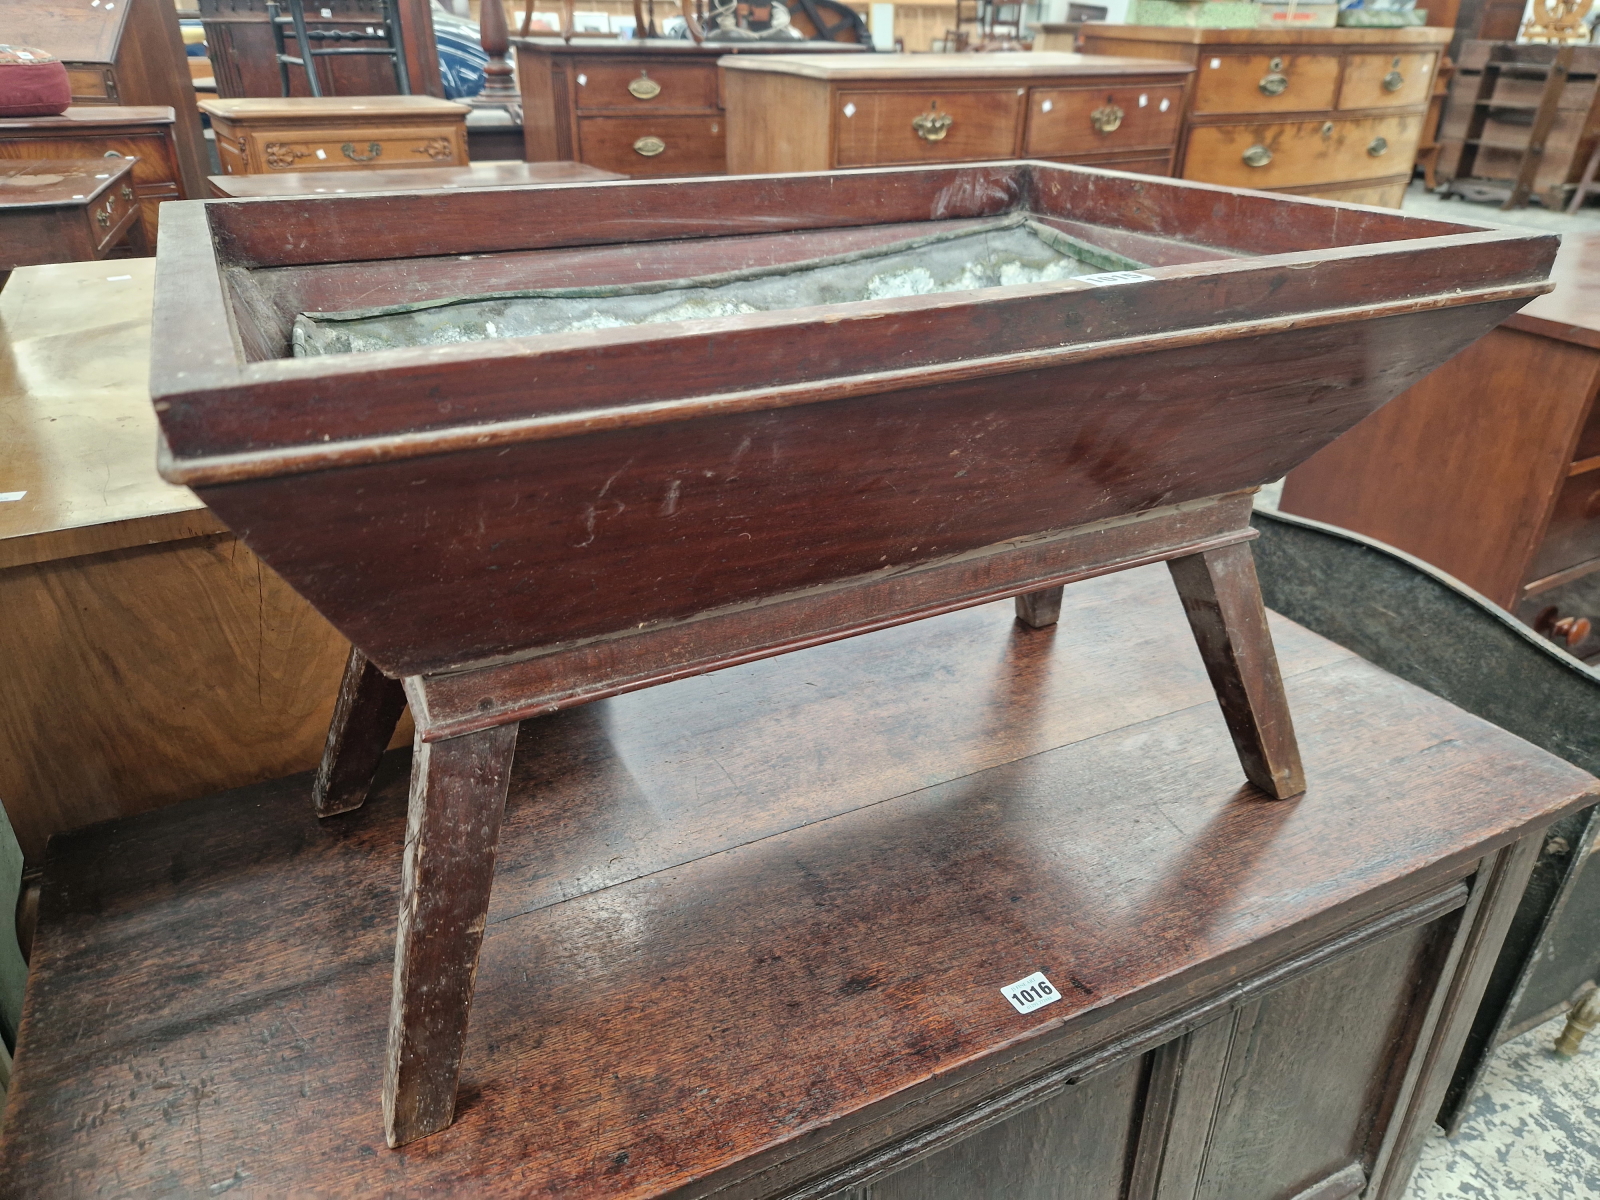 A DEEP RED PAINTED PLANTER TROUGH WITH A METAL LINER AND ON A STAND WITH FOUR SQUARE SECTIONED